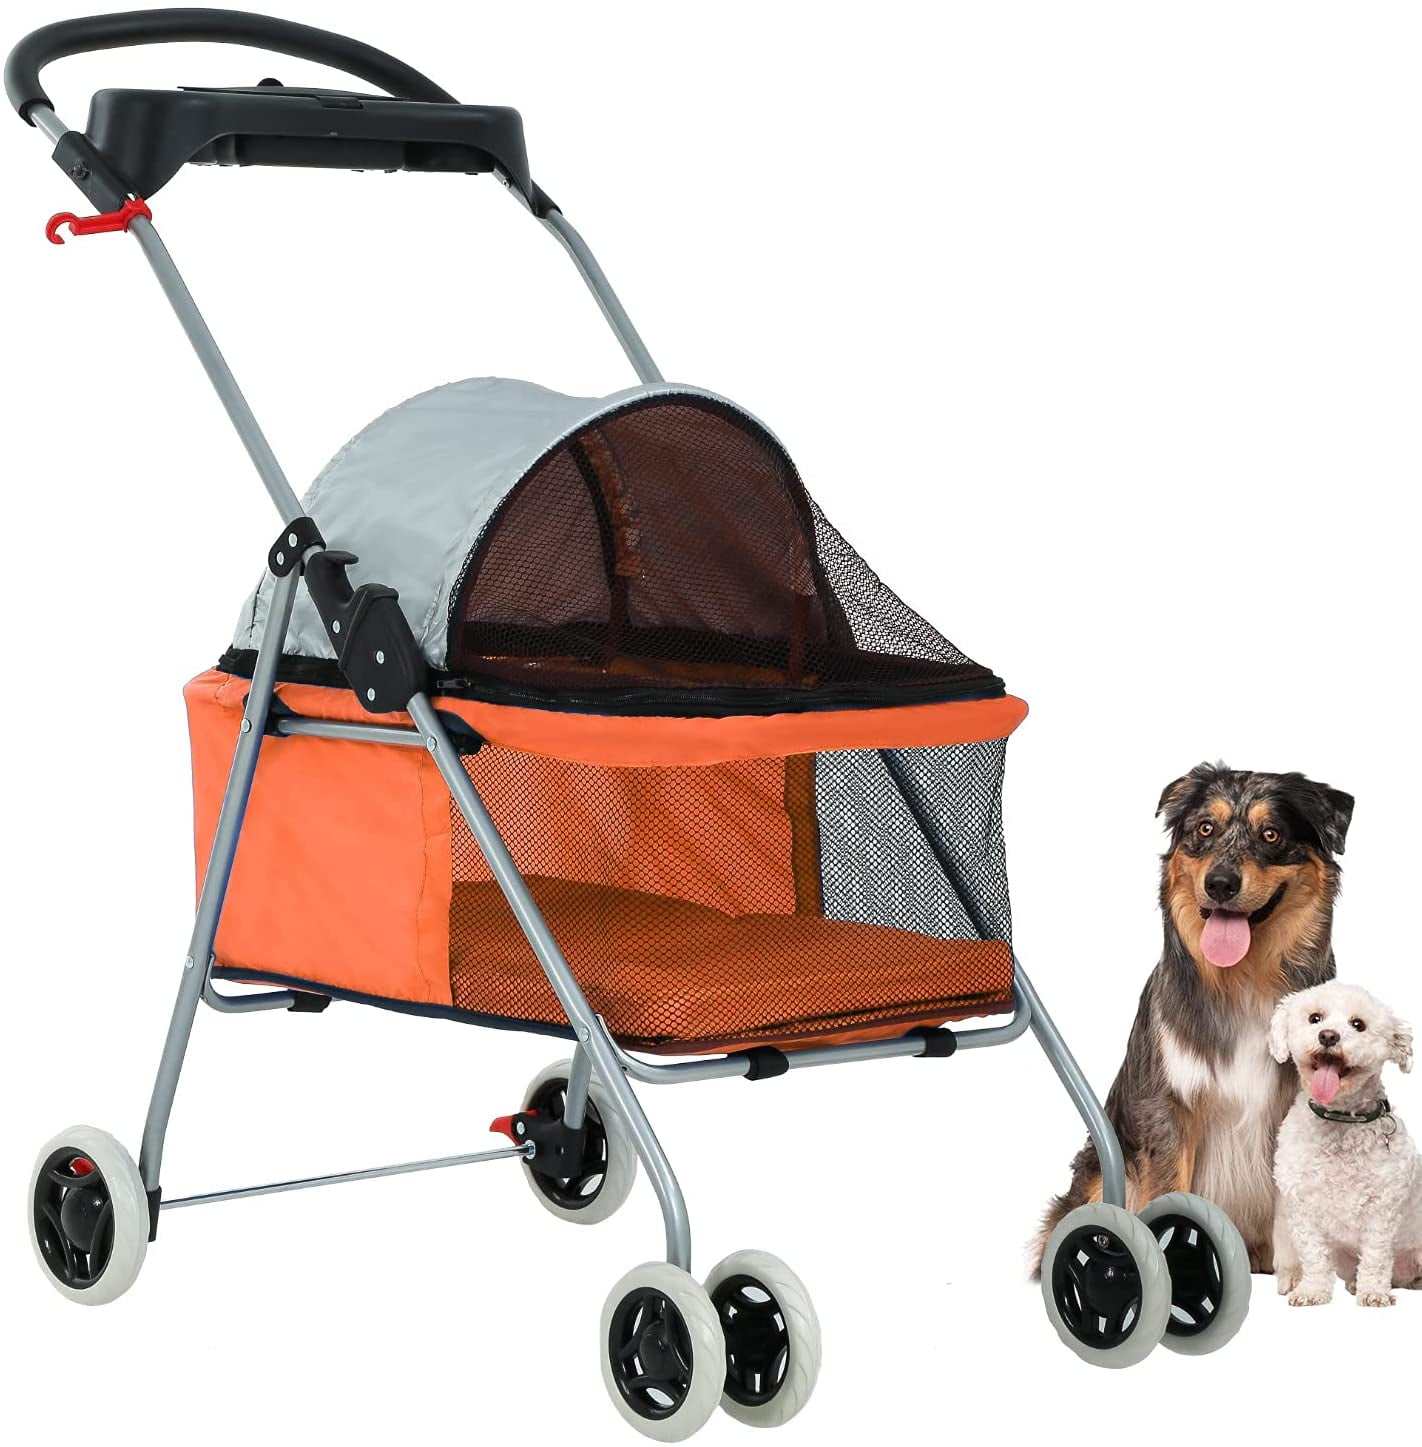 Dark Blue Pet Strollers for Small Medium Dogs & Cats 3-Wheel Dog Stroller Folding Flexible Easy to Carry for Jogger Jogging Walking Travel with Sun Shade Cup Holder Mesh Window